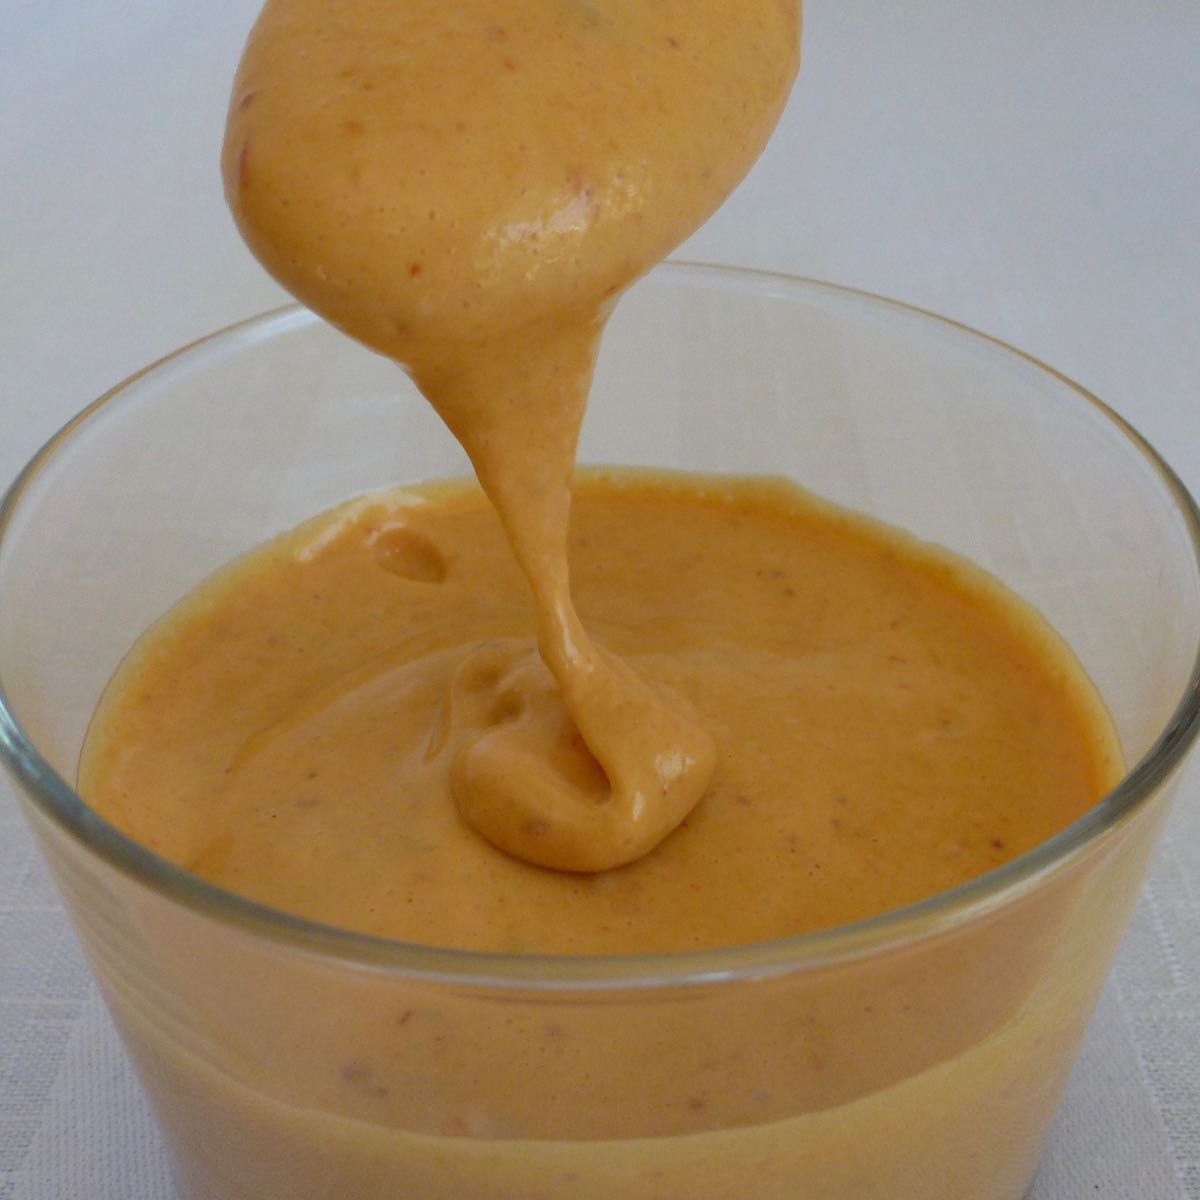 A dish of homemade Chipotle Mayo with a spoon lifting some out.